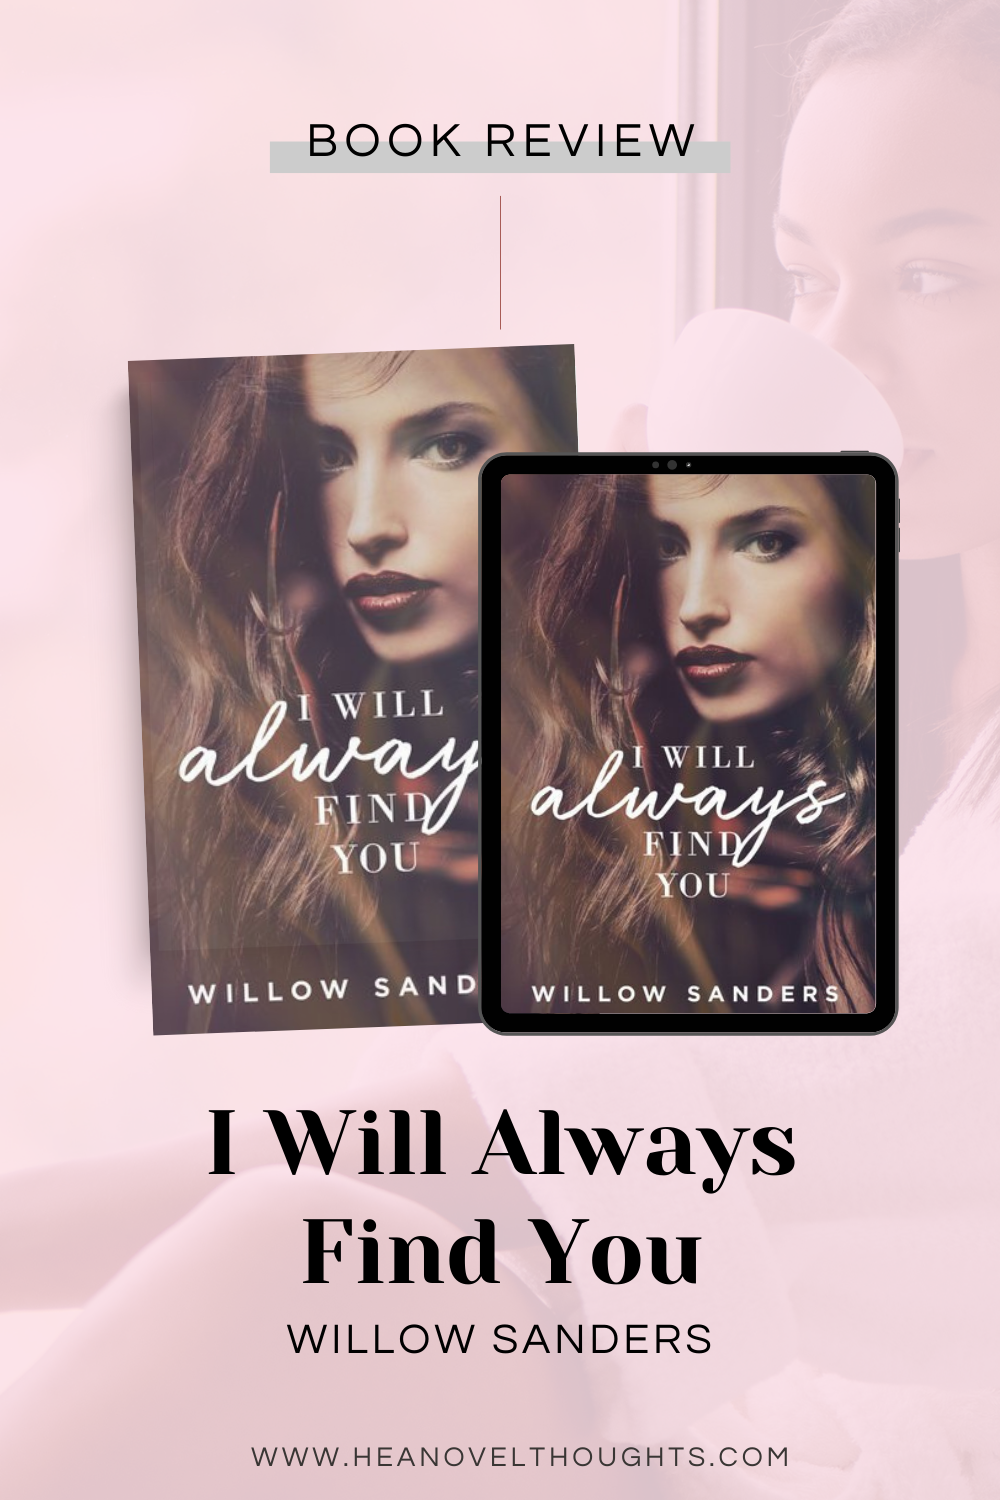 I Will Always Find You by Willow Sanders